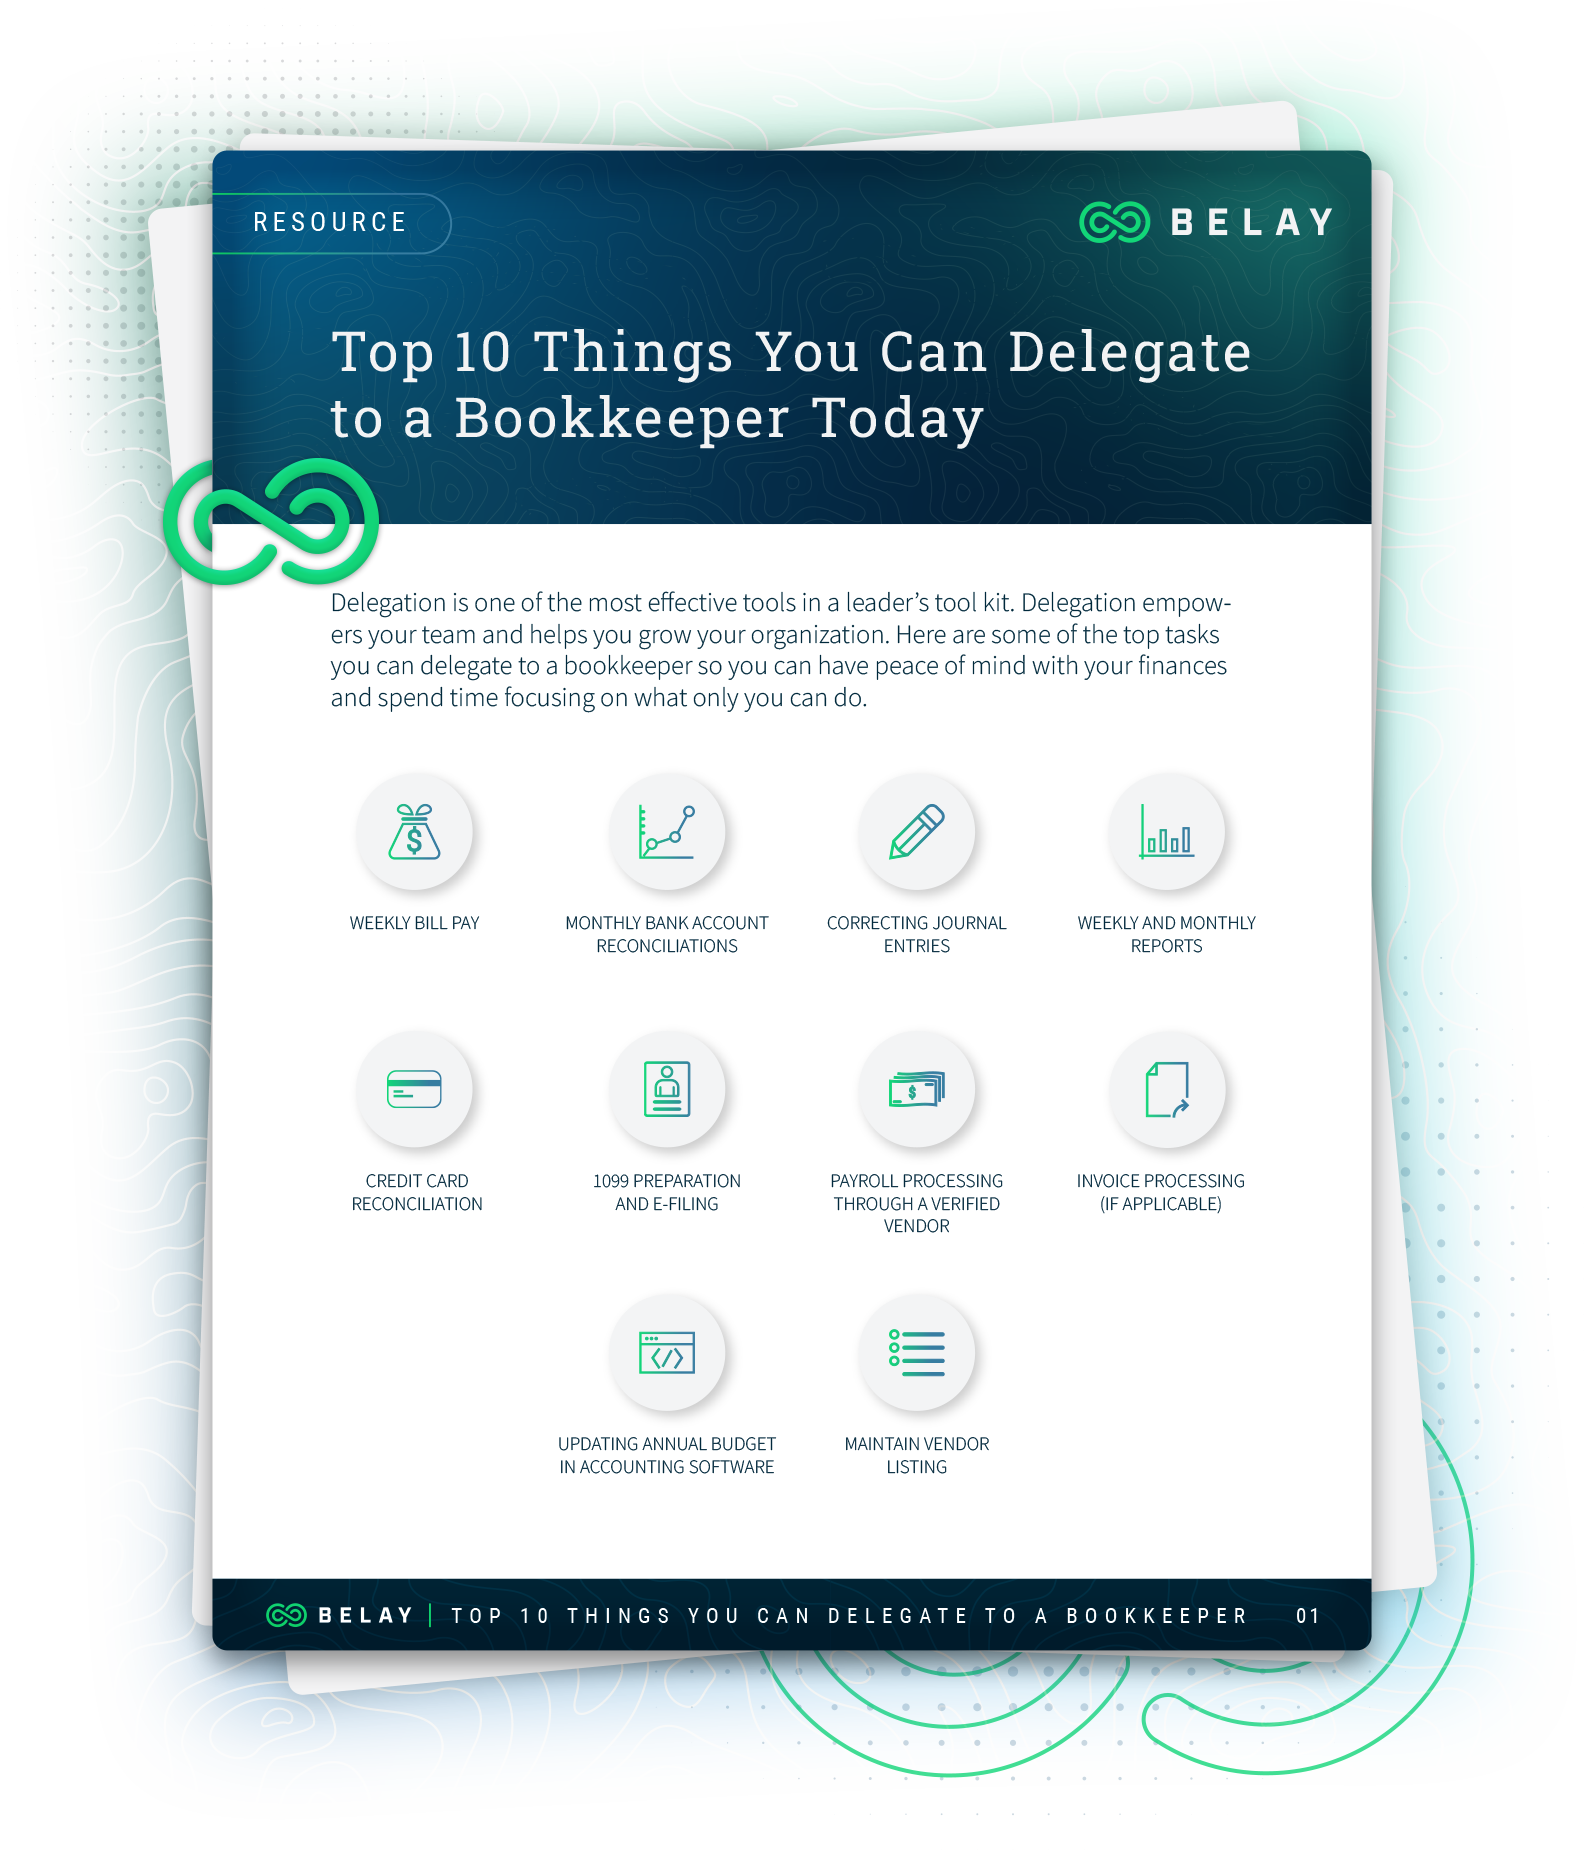 Top 10 Things You Can Delegate to a Bookkeeper Today